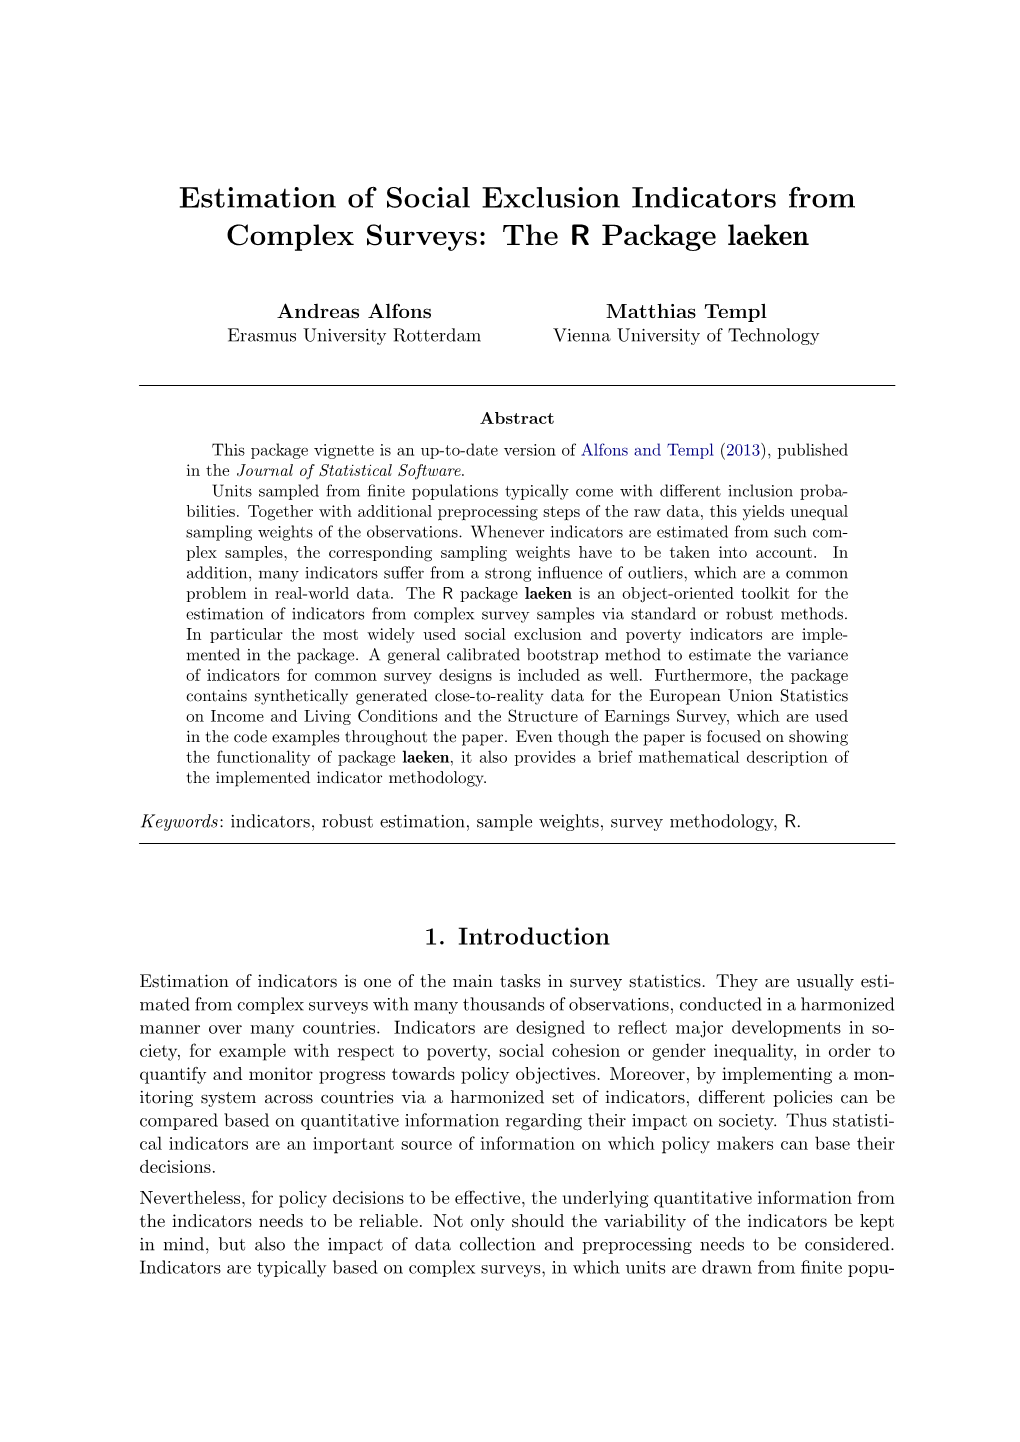 Estimation of Social Exclusion Indicators from Complex Surveys: the R Package Laeken